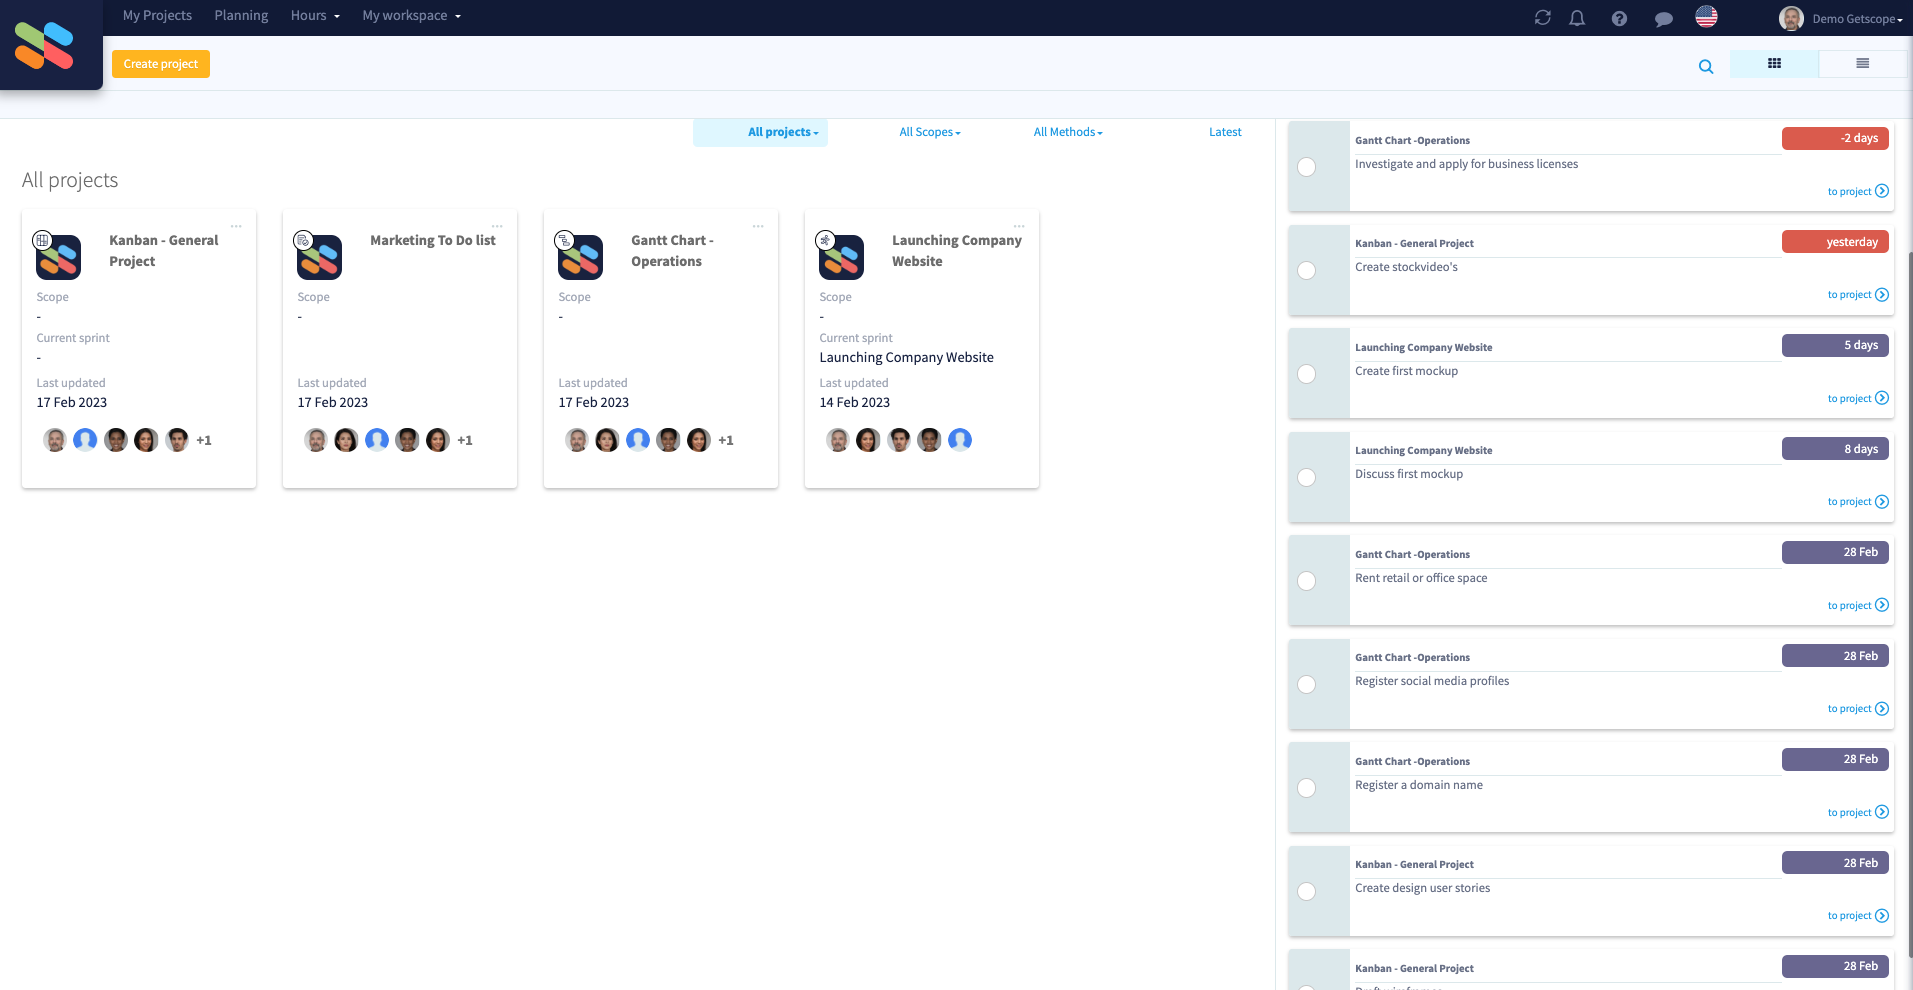 GetScope's Workspaces feature enables you to efficiently manage multiple projects and teams. You can create an unlimited number of workspaces and assign team members to each workspace, simplifying your project collaboration process.